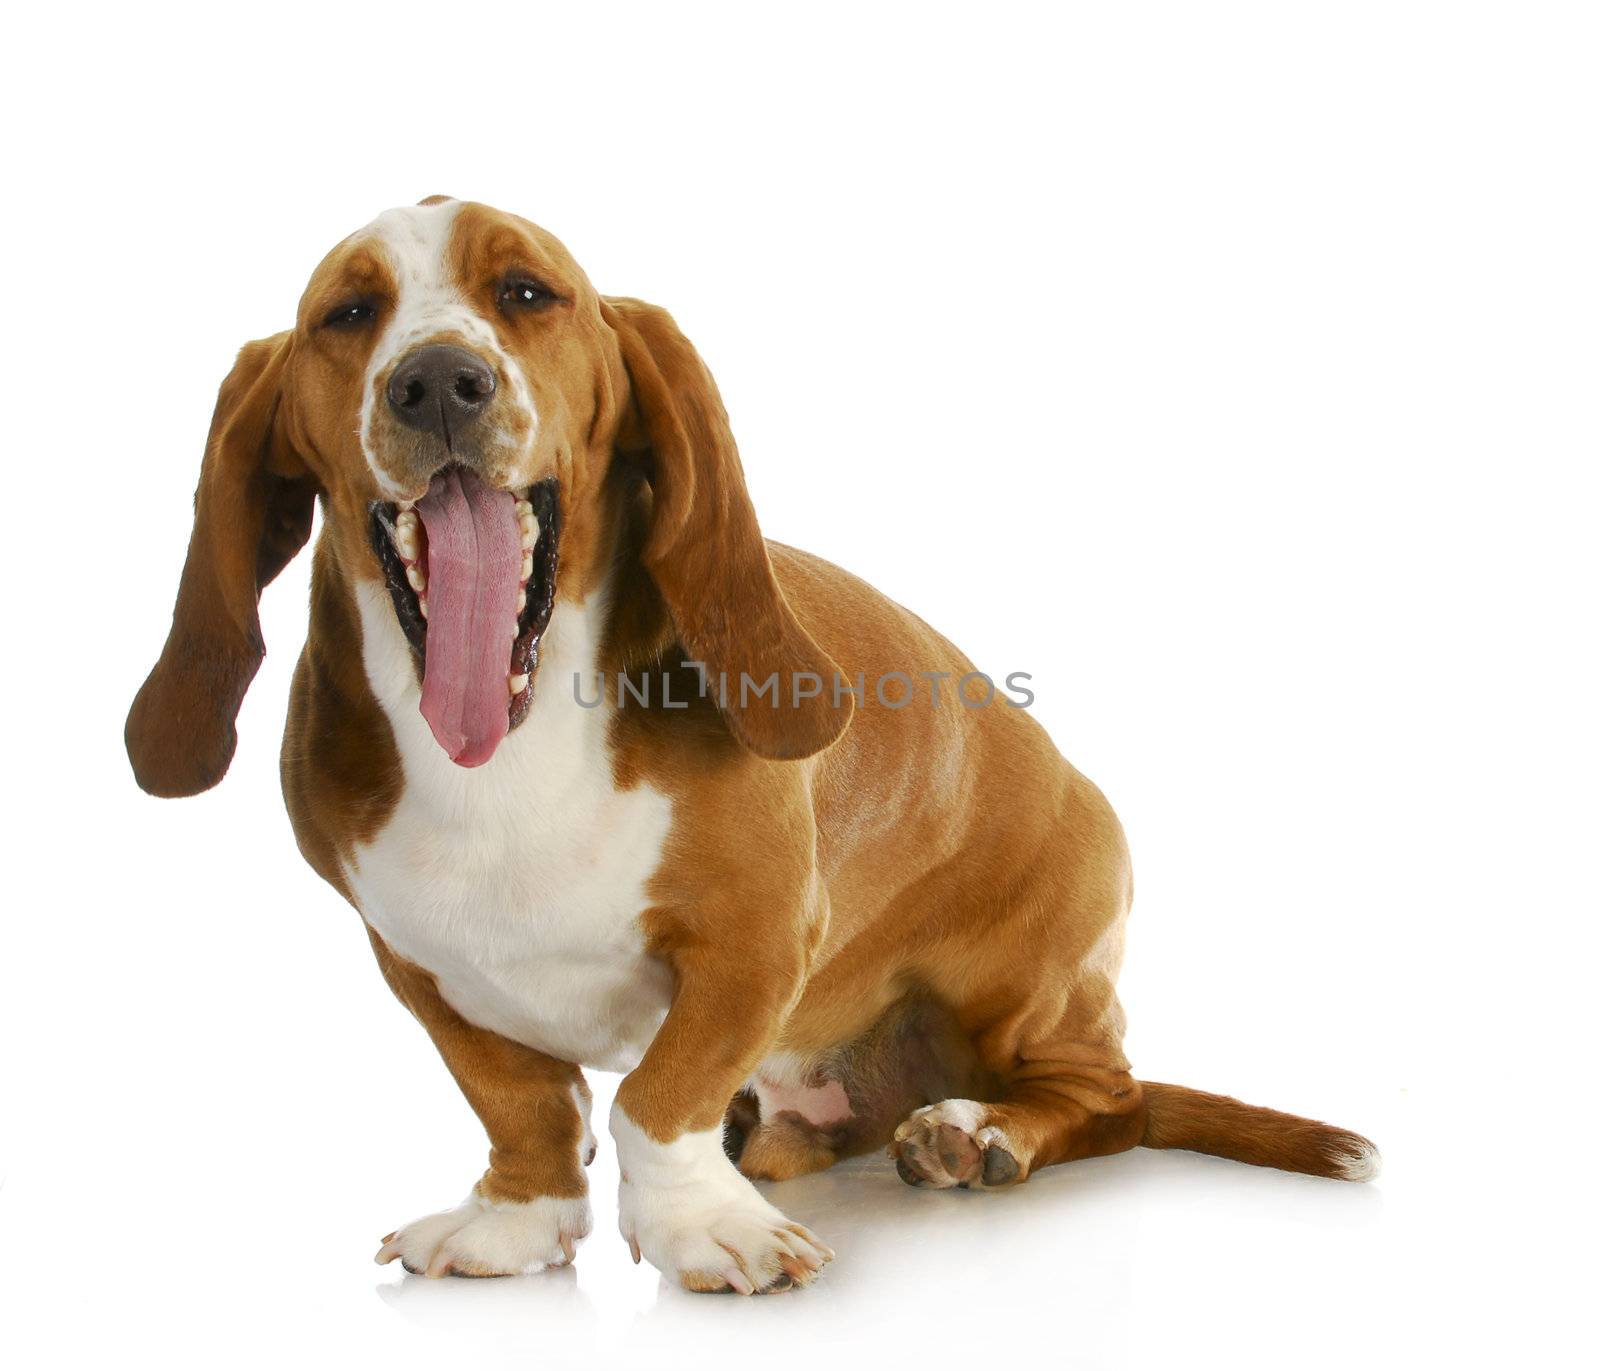 basset hound by willeecole123